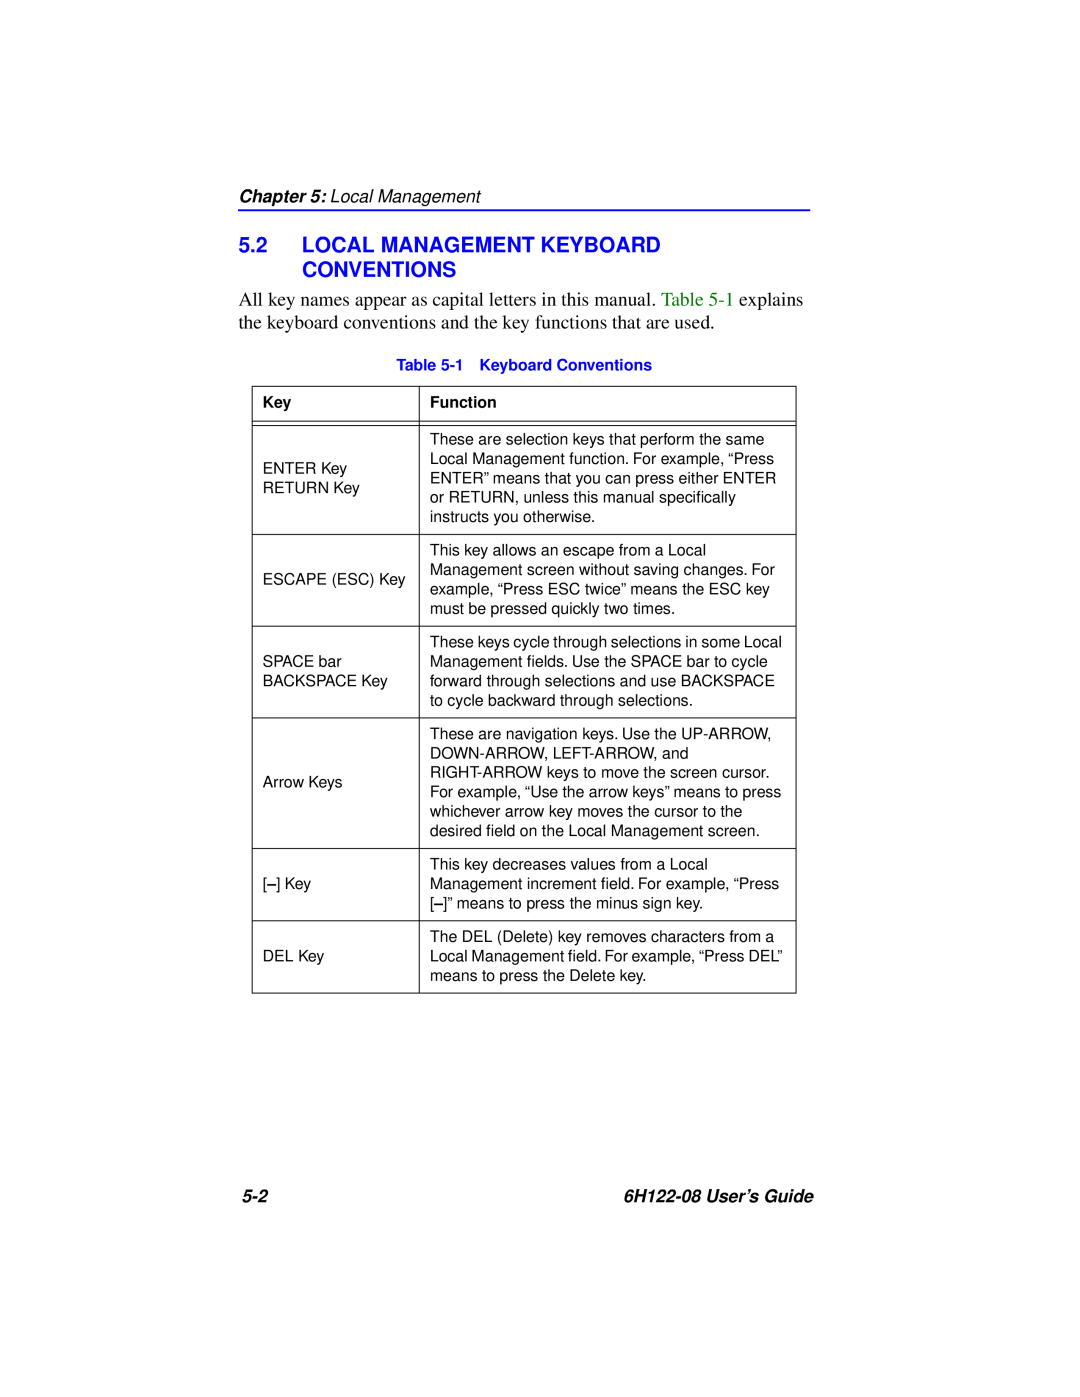 Cabletron Systems manual Local Management Keyboard Conventions, 6H122-08 User’s Guide, 1 Keyboard Conventions, Function 